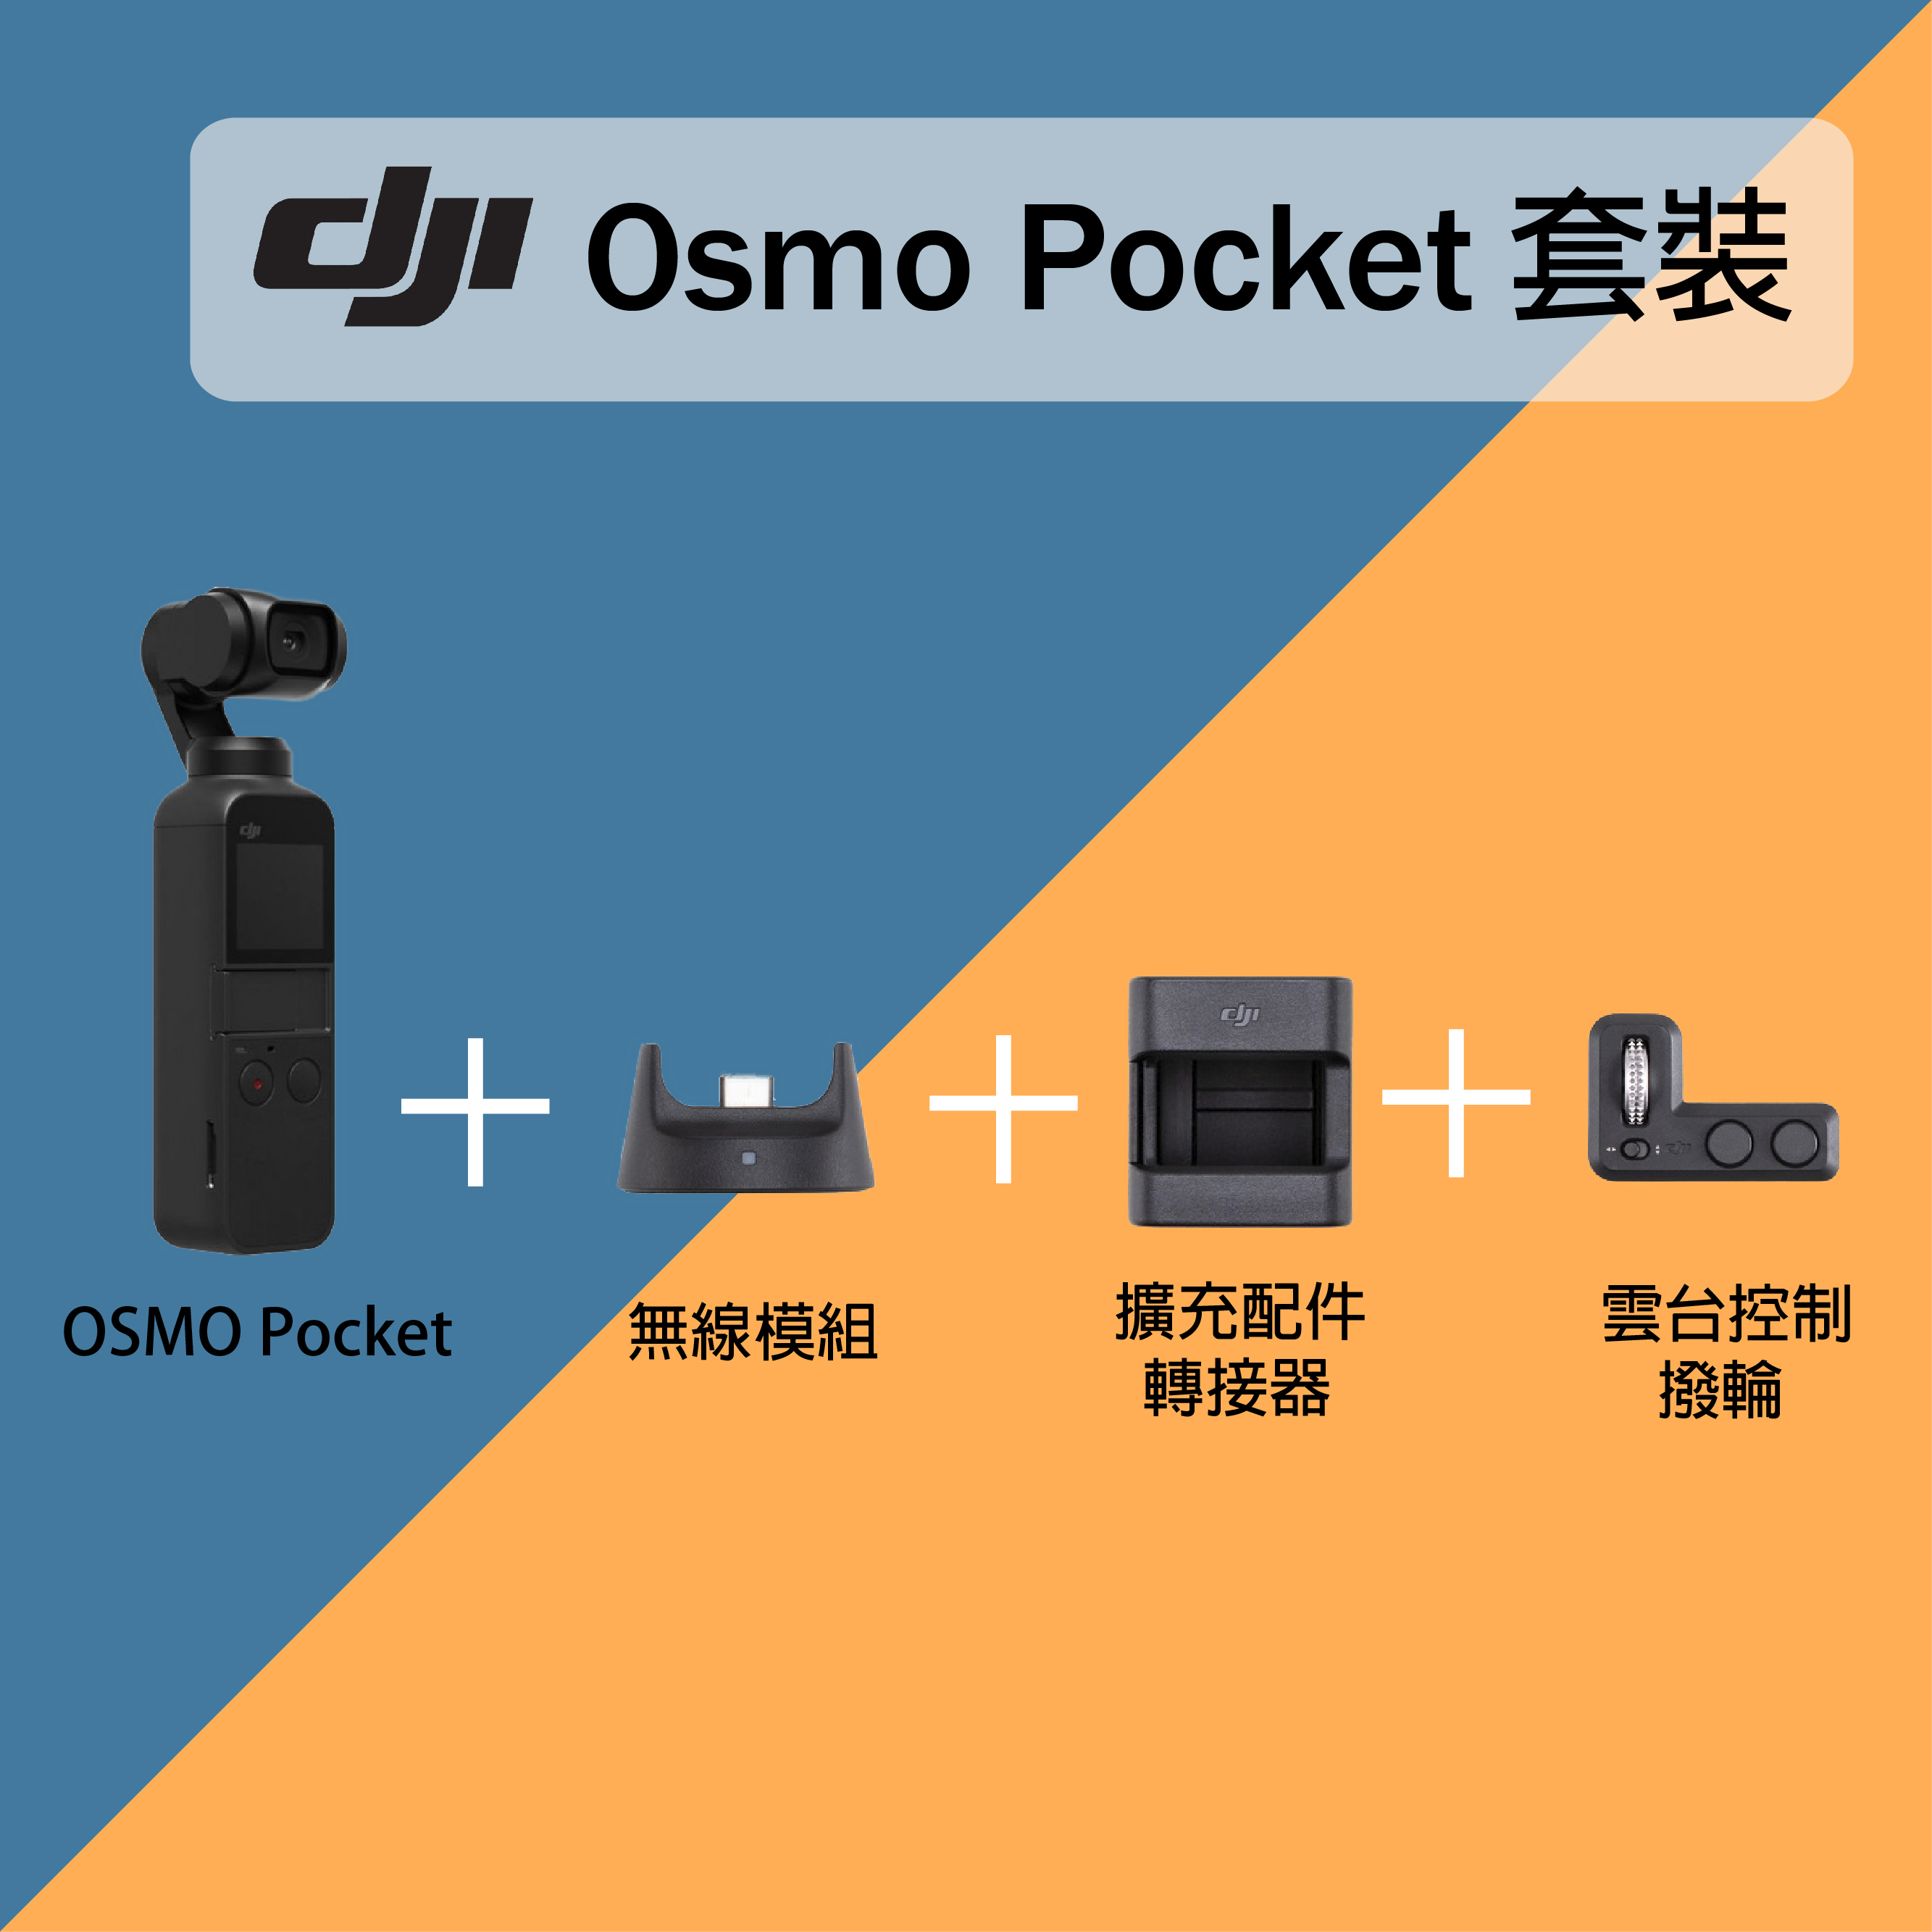 Osmo Pocket Package